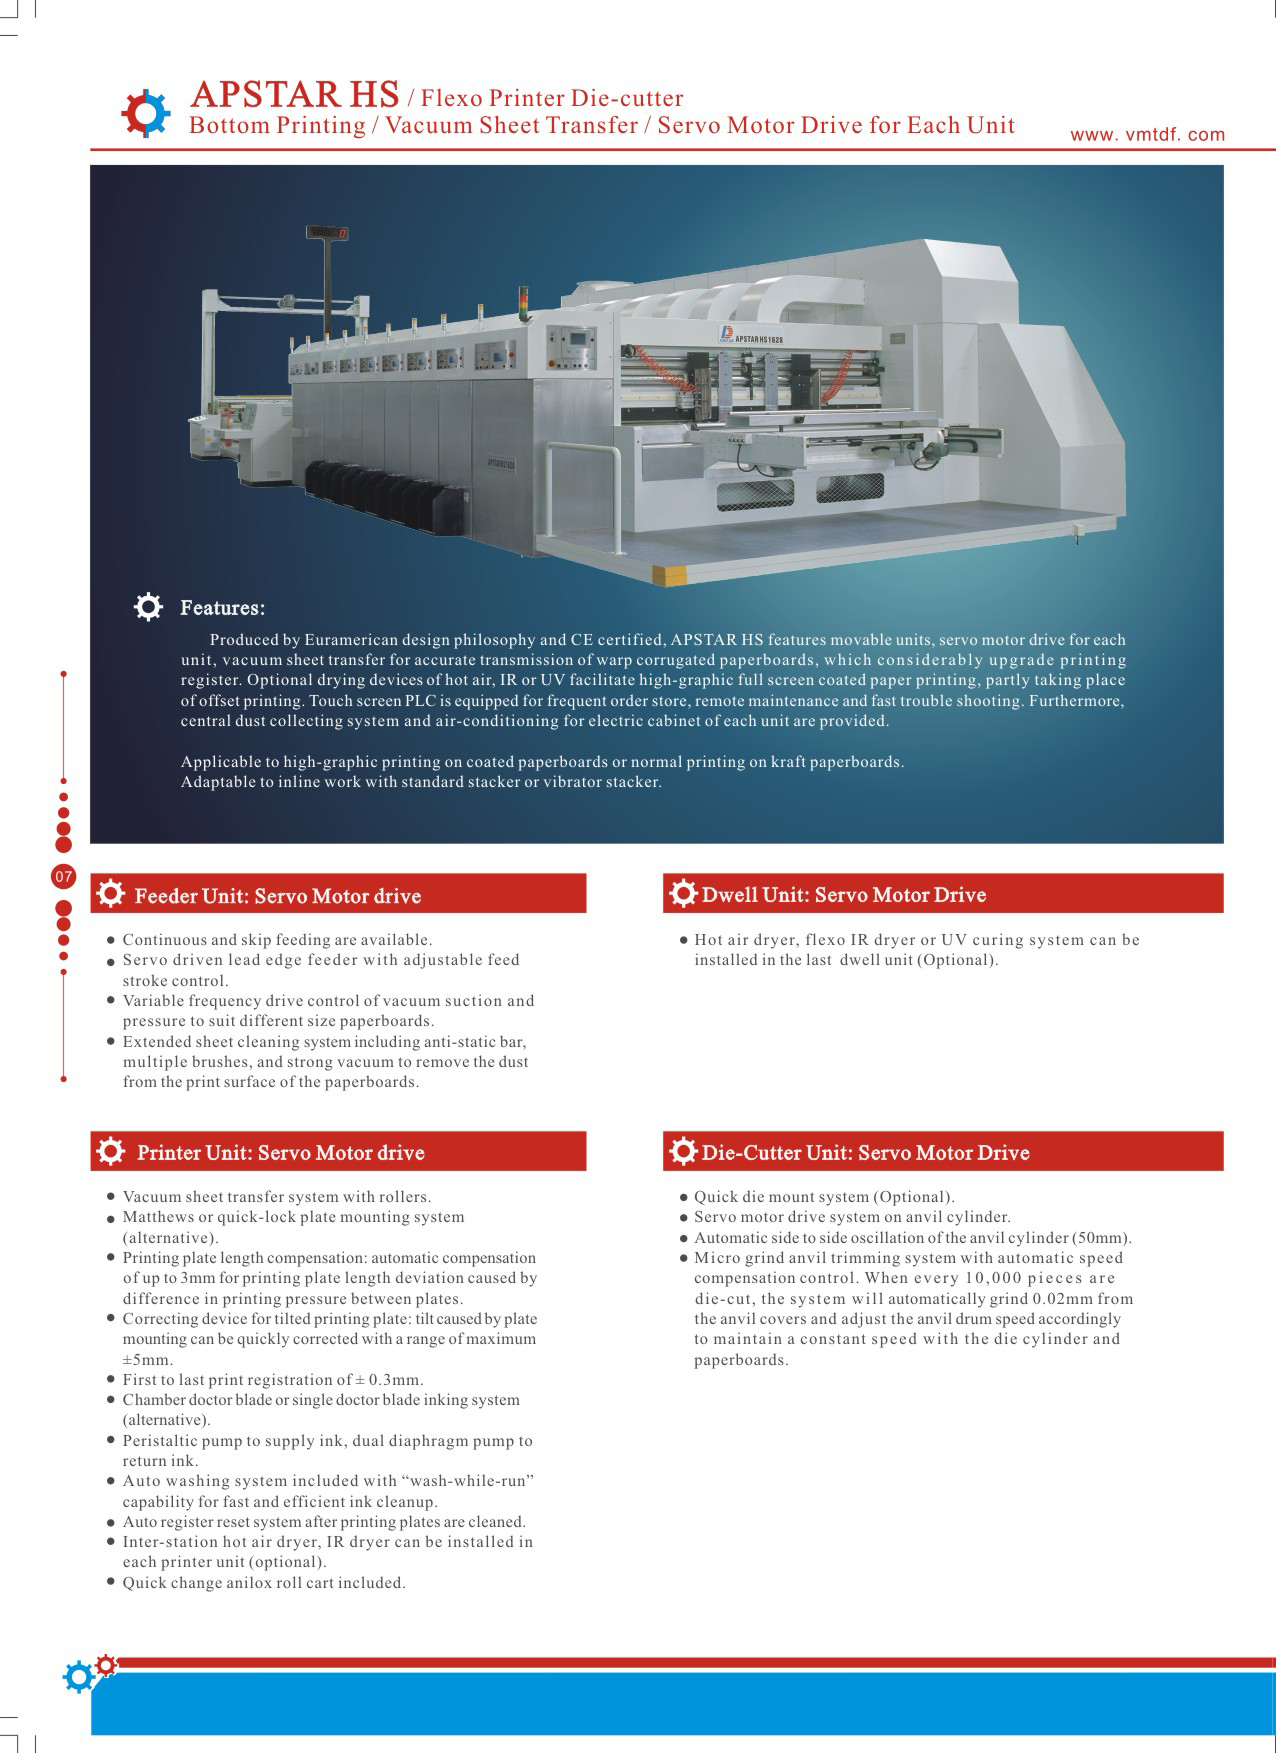 Learn more about the Apstar HS Flexo Printer Die Cutter in the Dong Fang brochure.